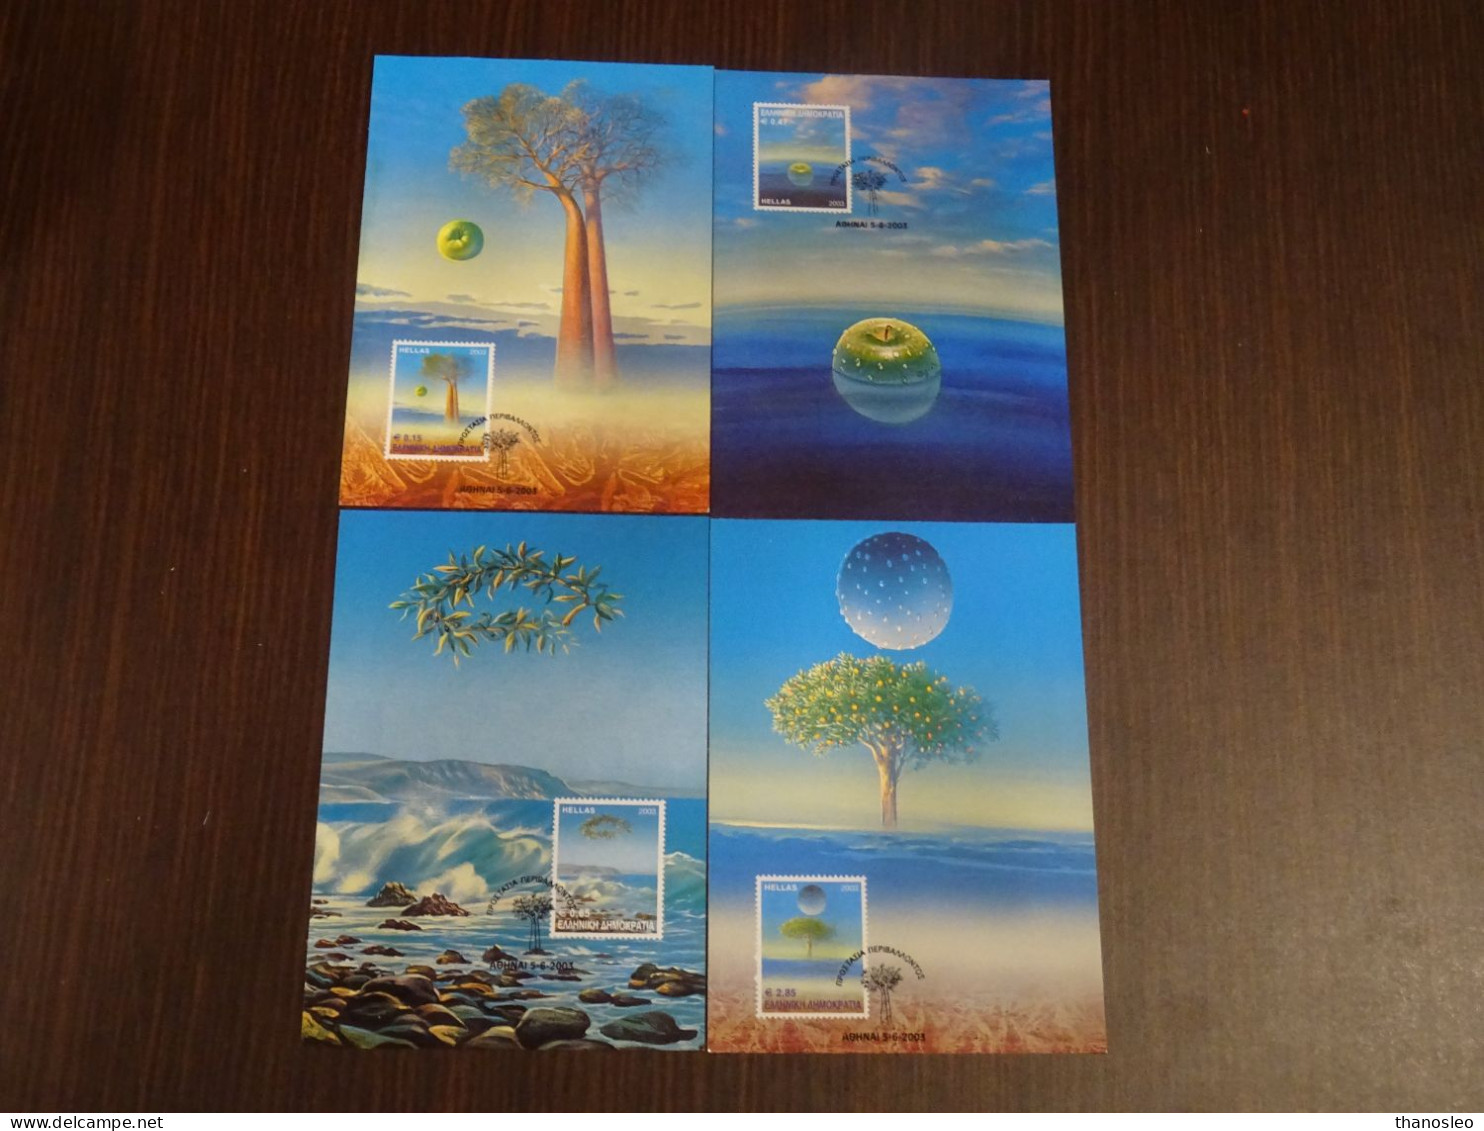 Greece 2003 Protection Of The Environment Maxi Card Set VF - Maximum Cards & Covers